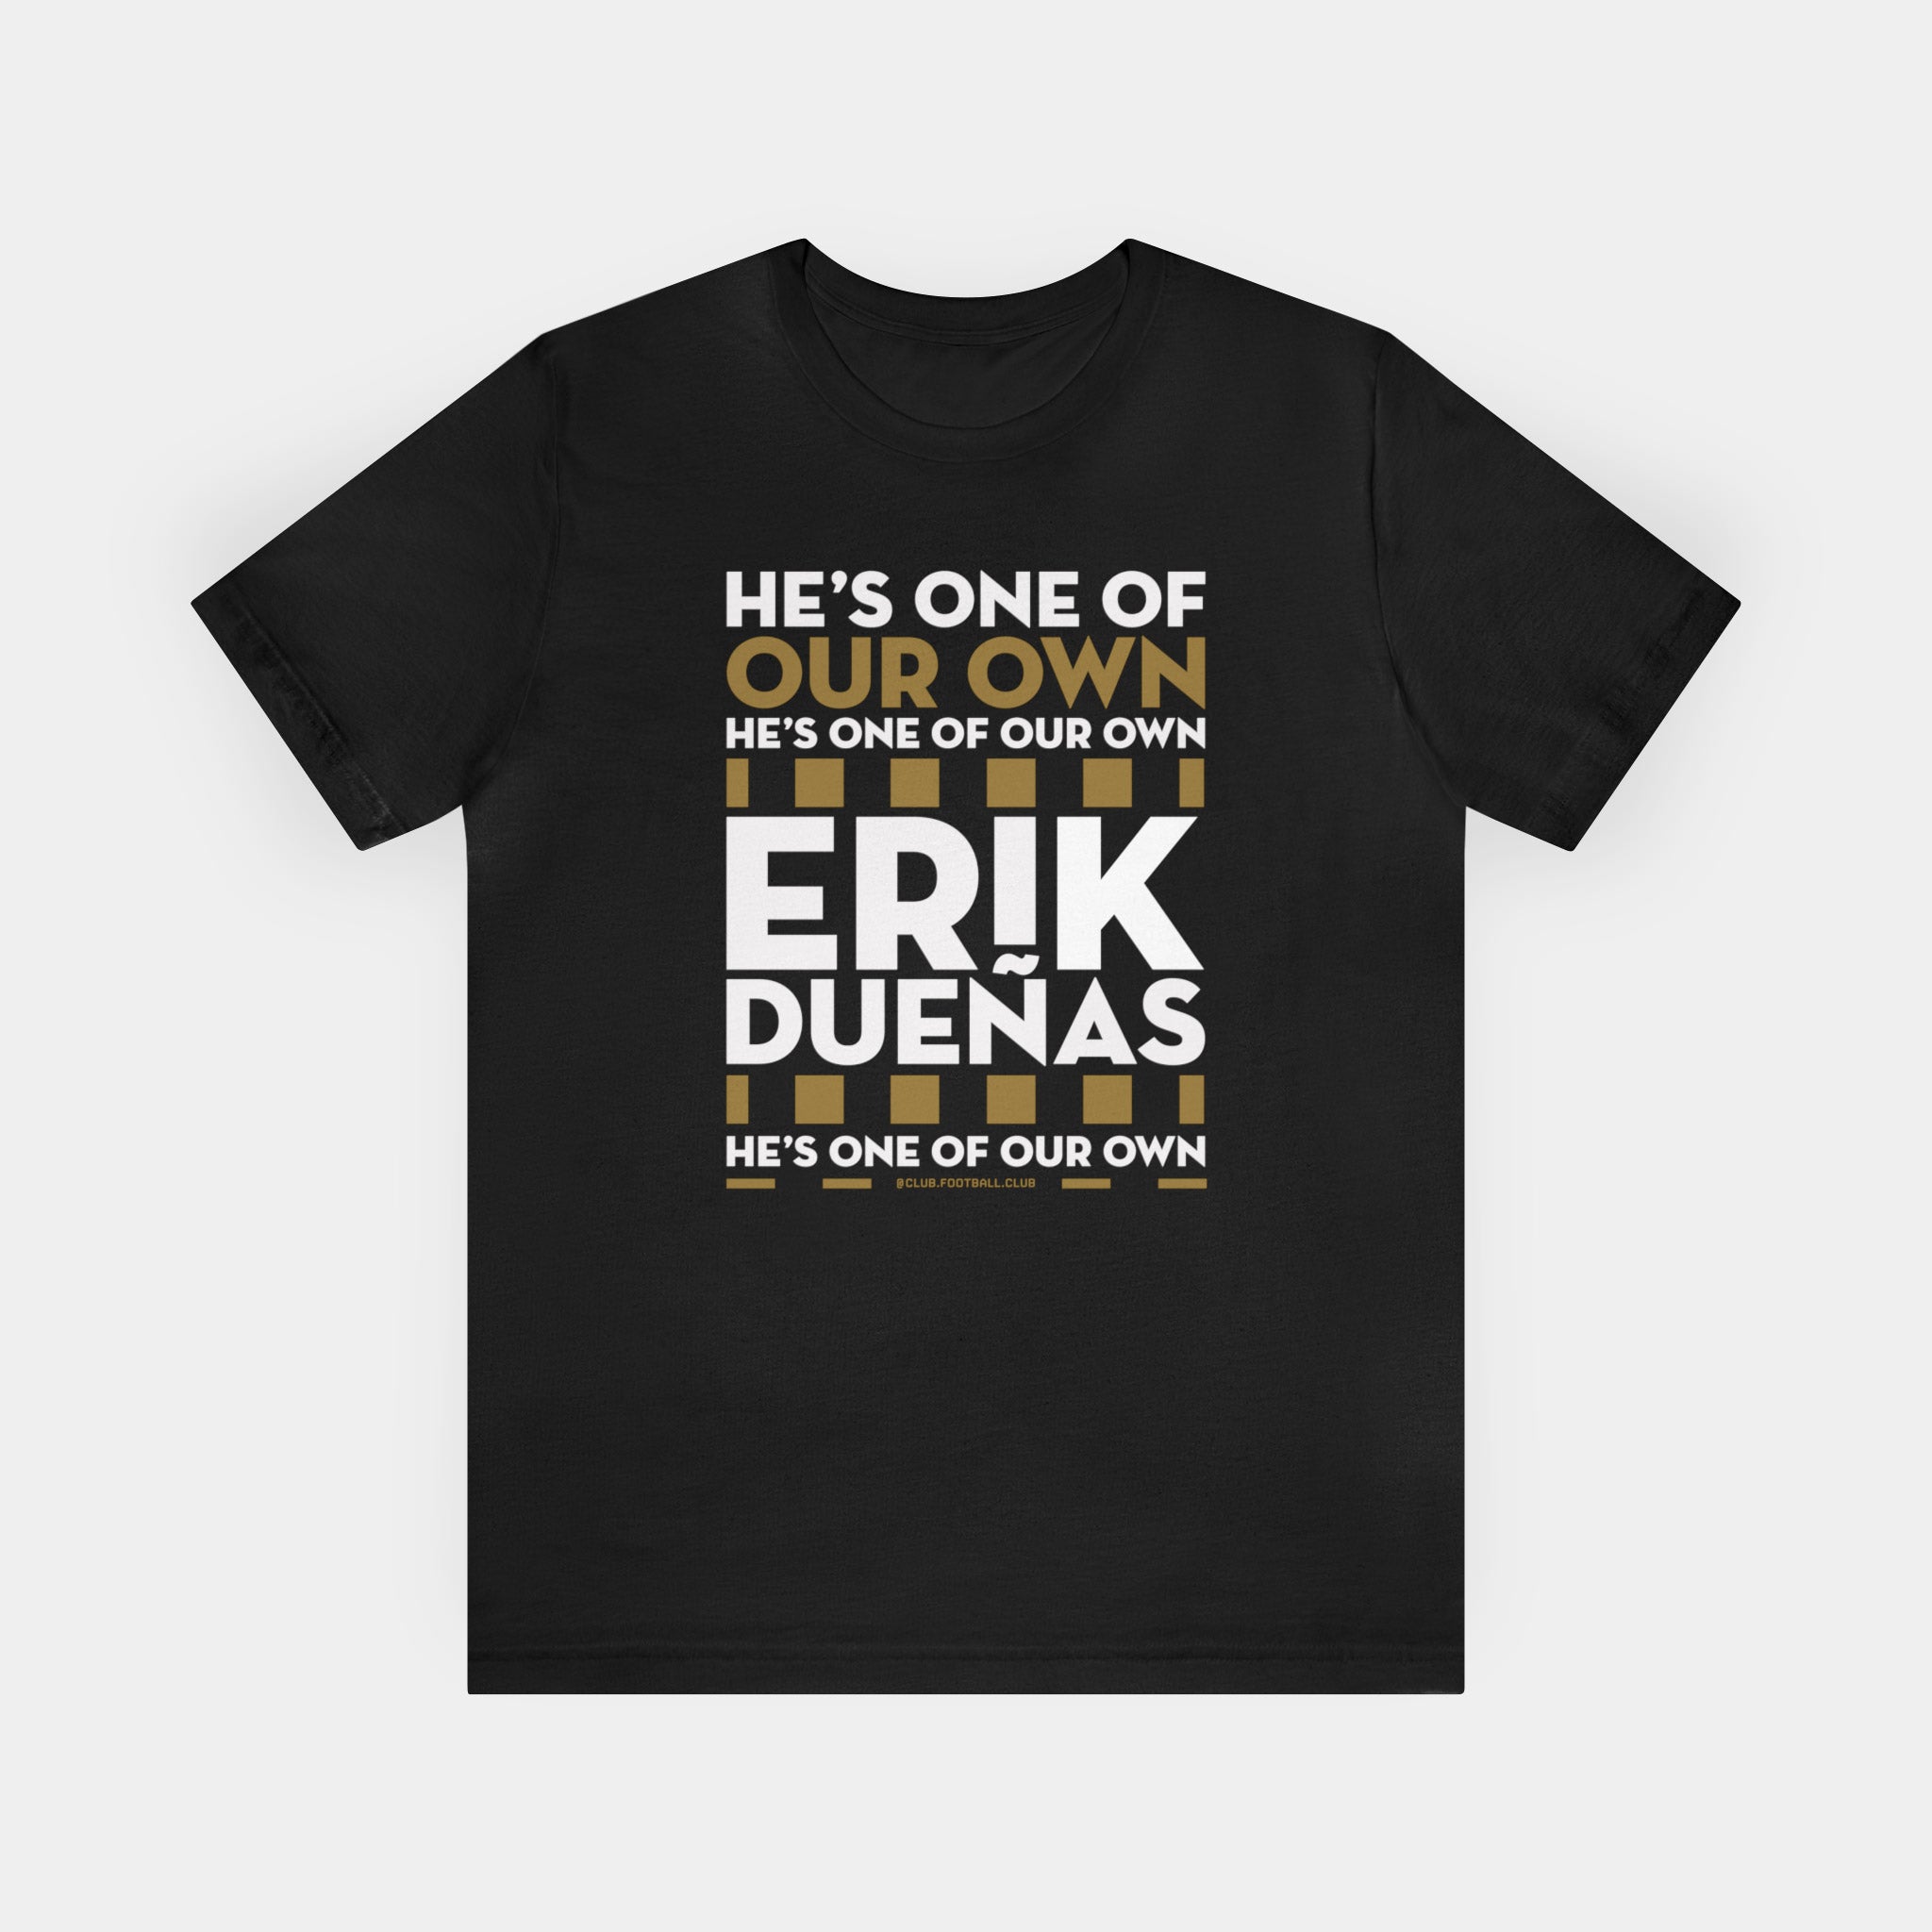 Erik Dueñas, He's One of Our Own (LAFC) T-shirt